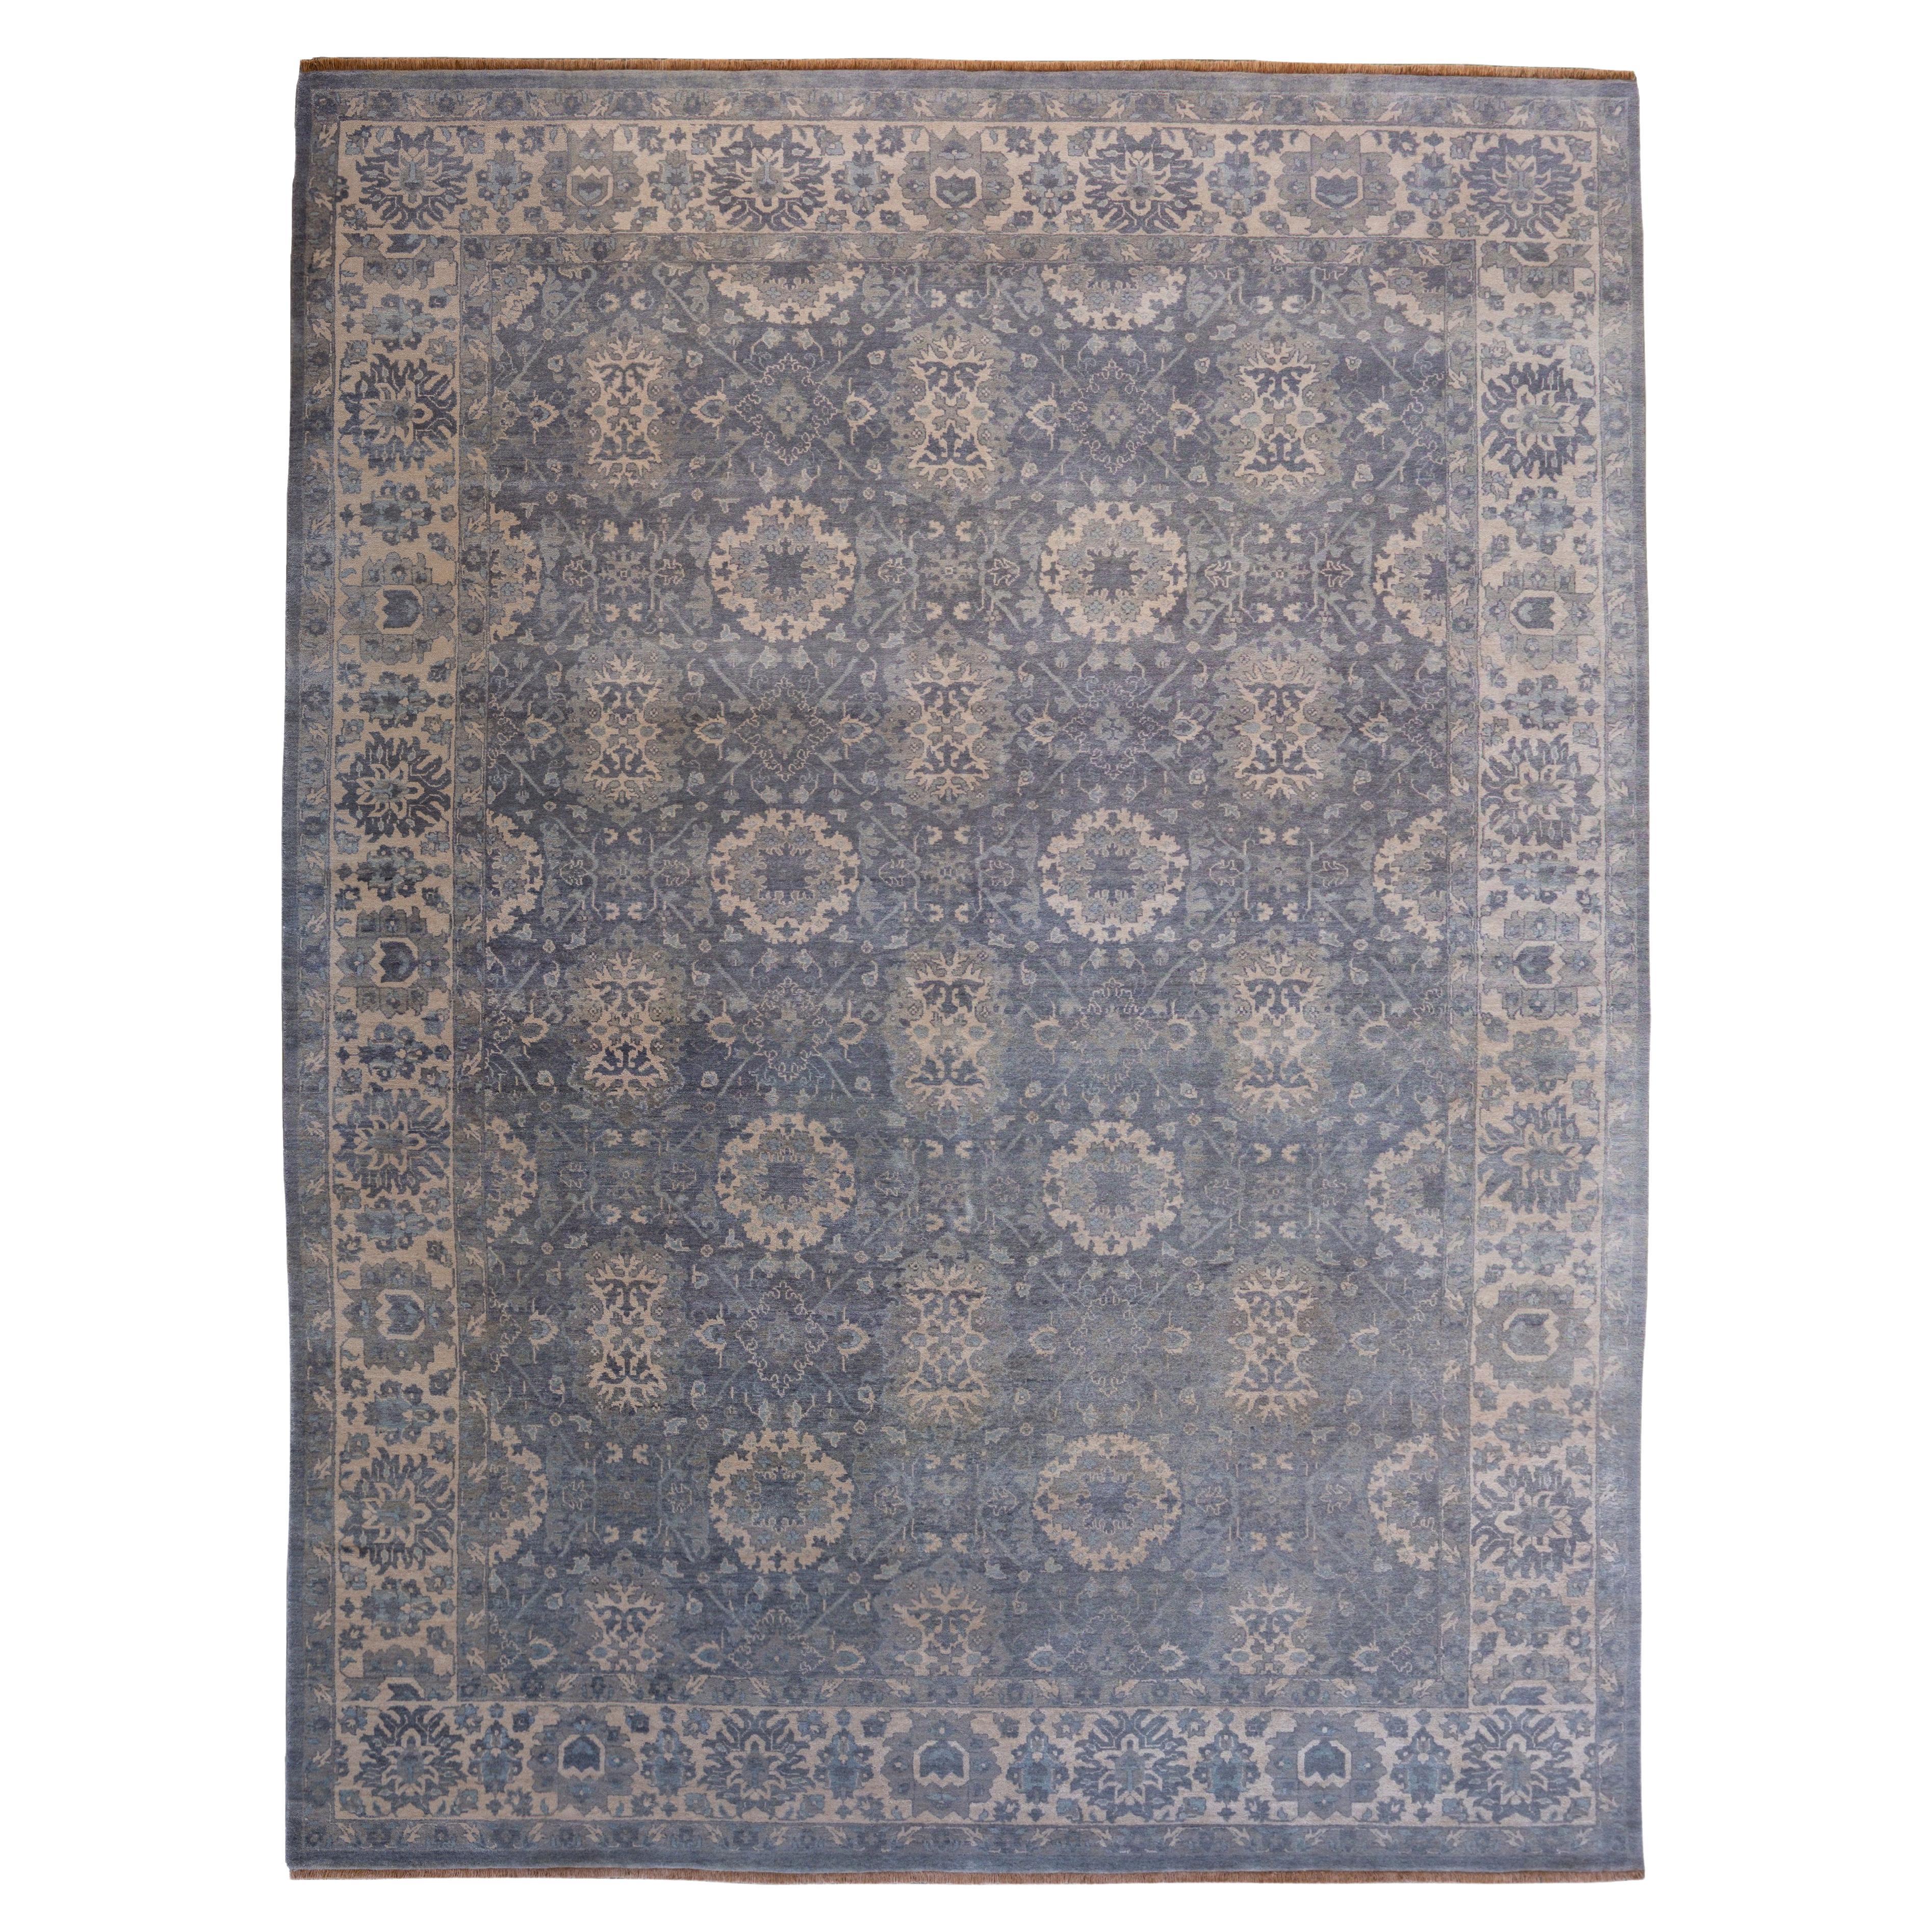 Formal and Transitional Grey Hand-Knotted Wool Persian Carpet, 9' x 12'